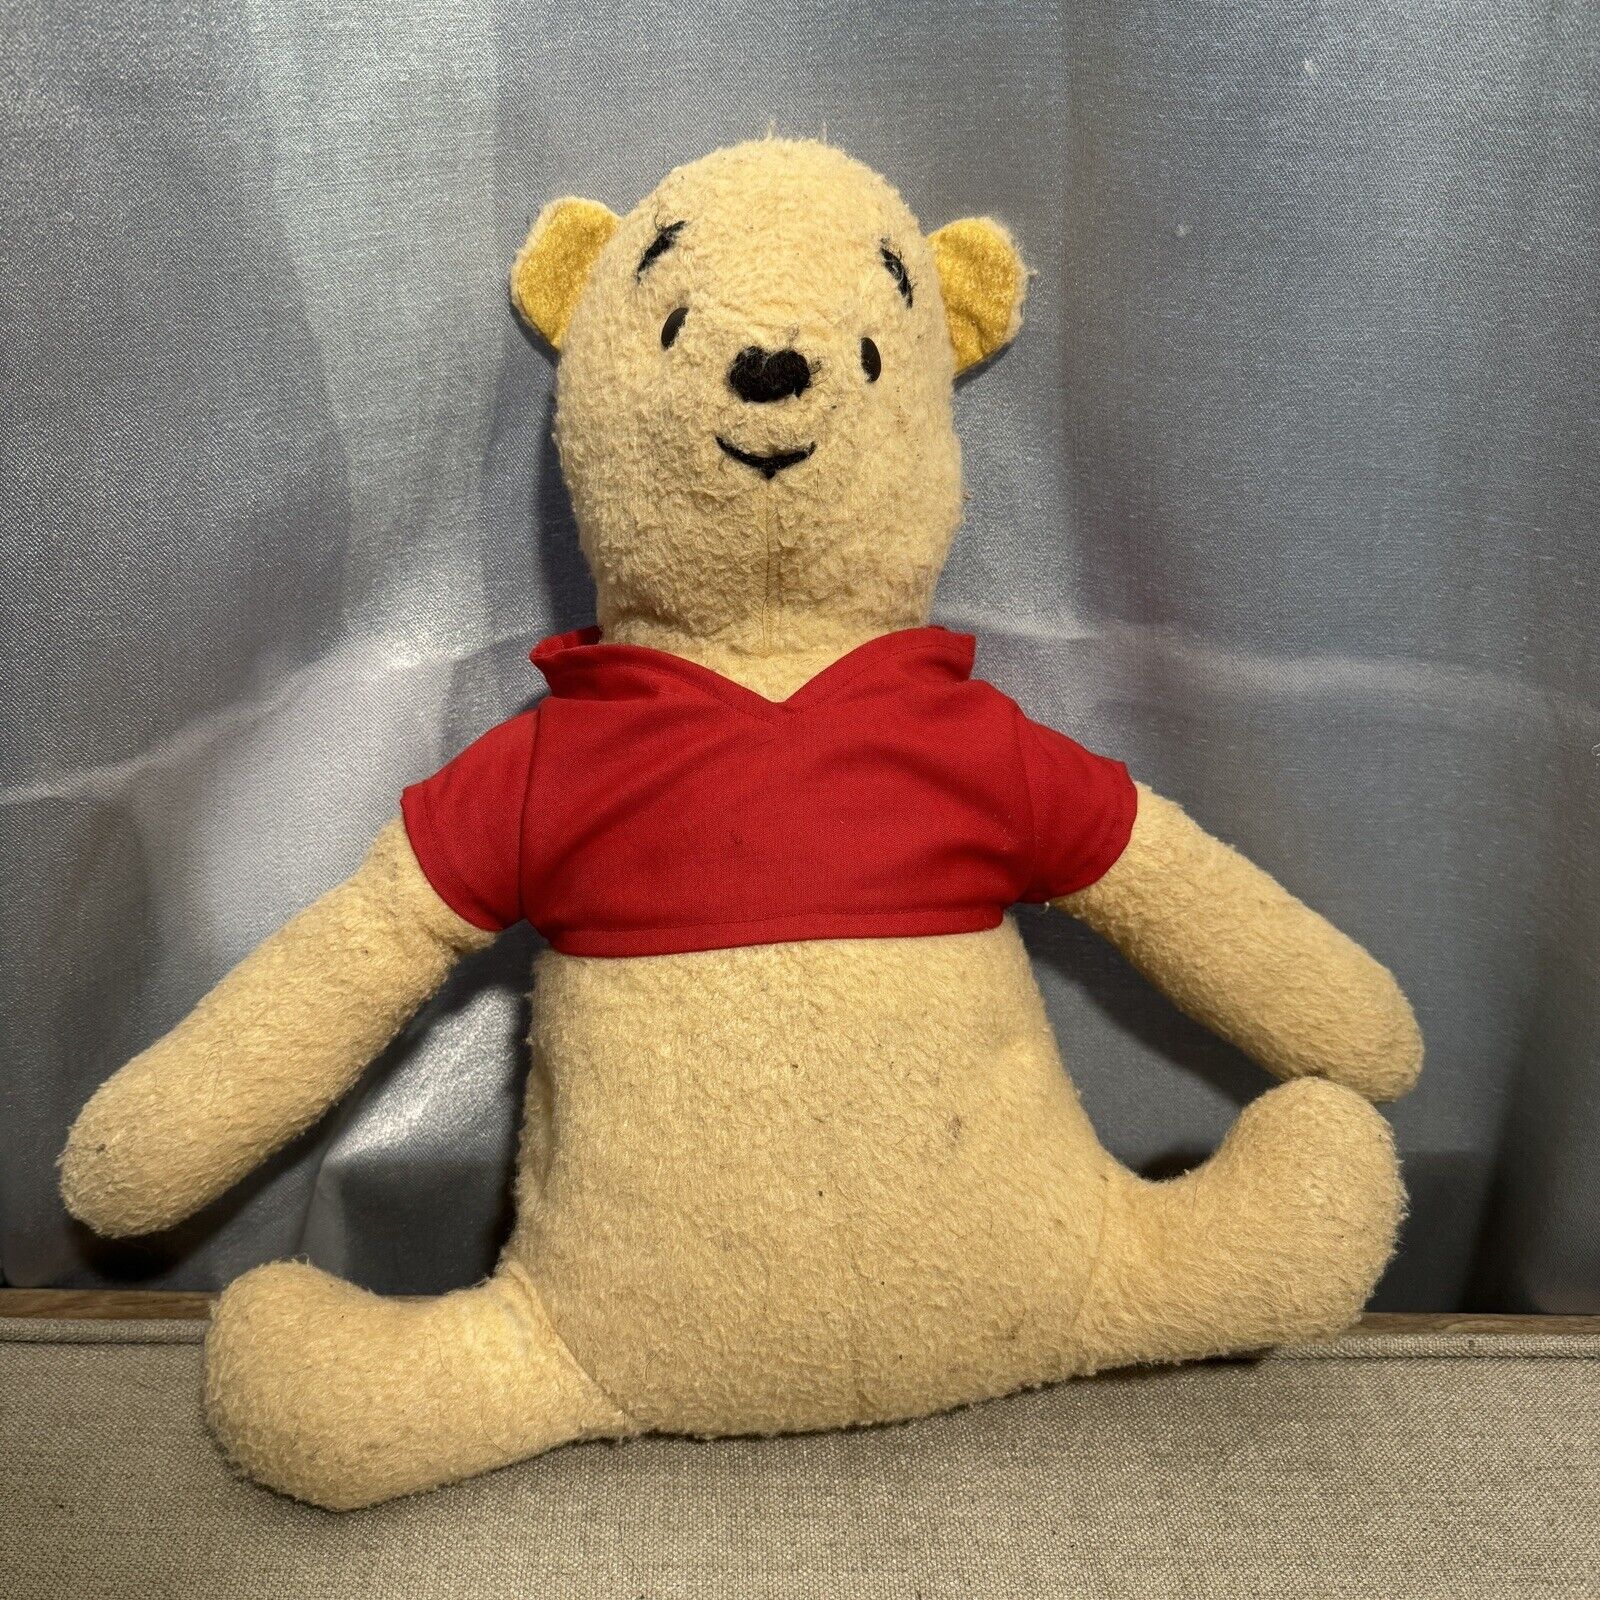 Vintage Winnie The Pooh Plush Yellow 15” In. Soft Old Collectible Rare